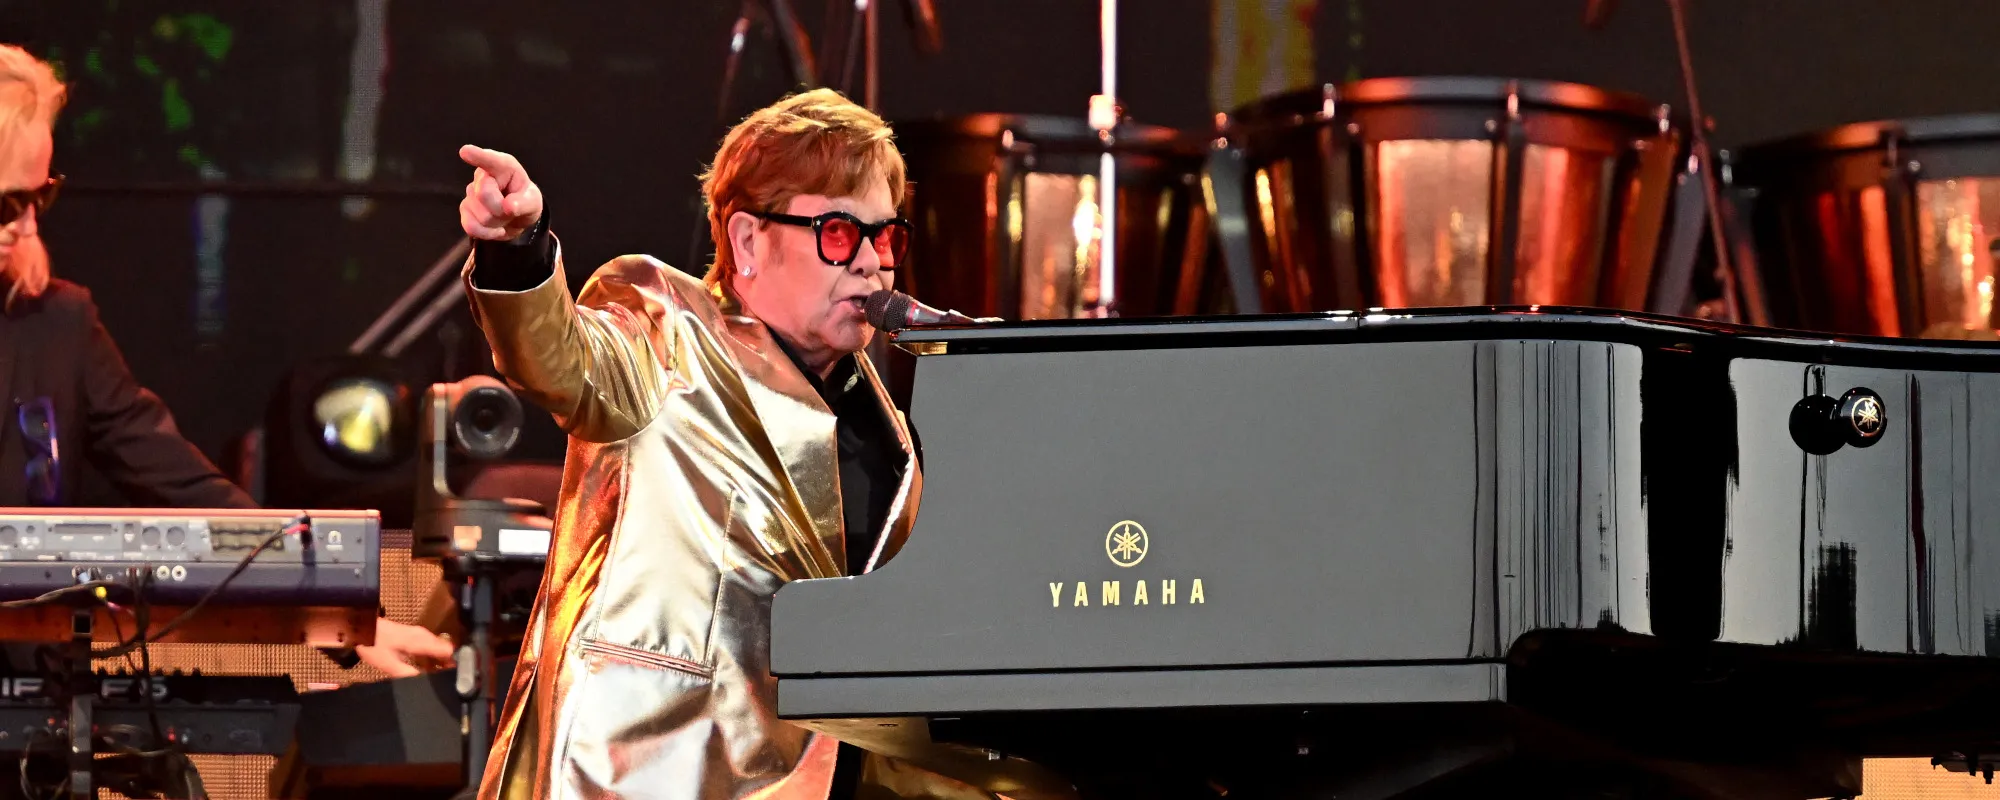 Elton John Speaks Out About BBC’s “Worrying” Music Programming Cuts